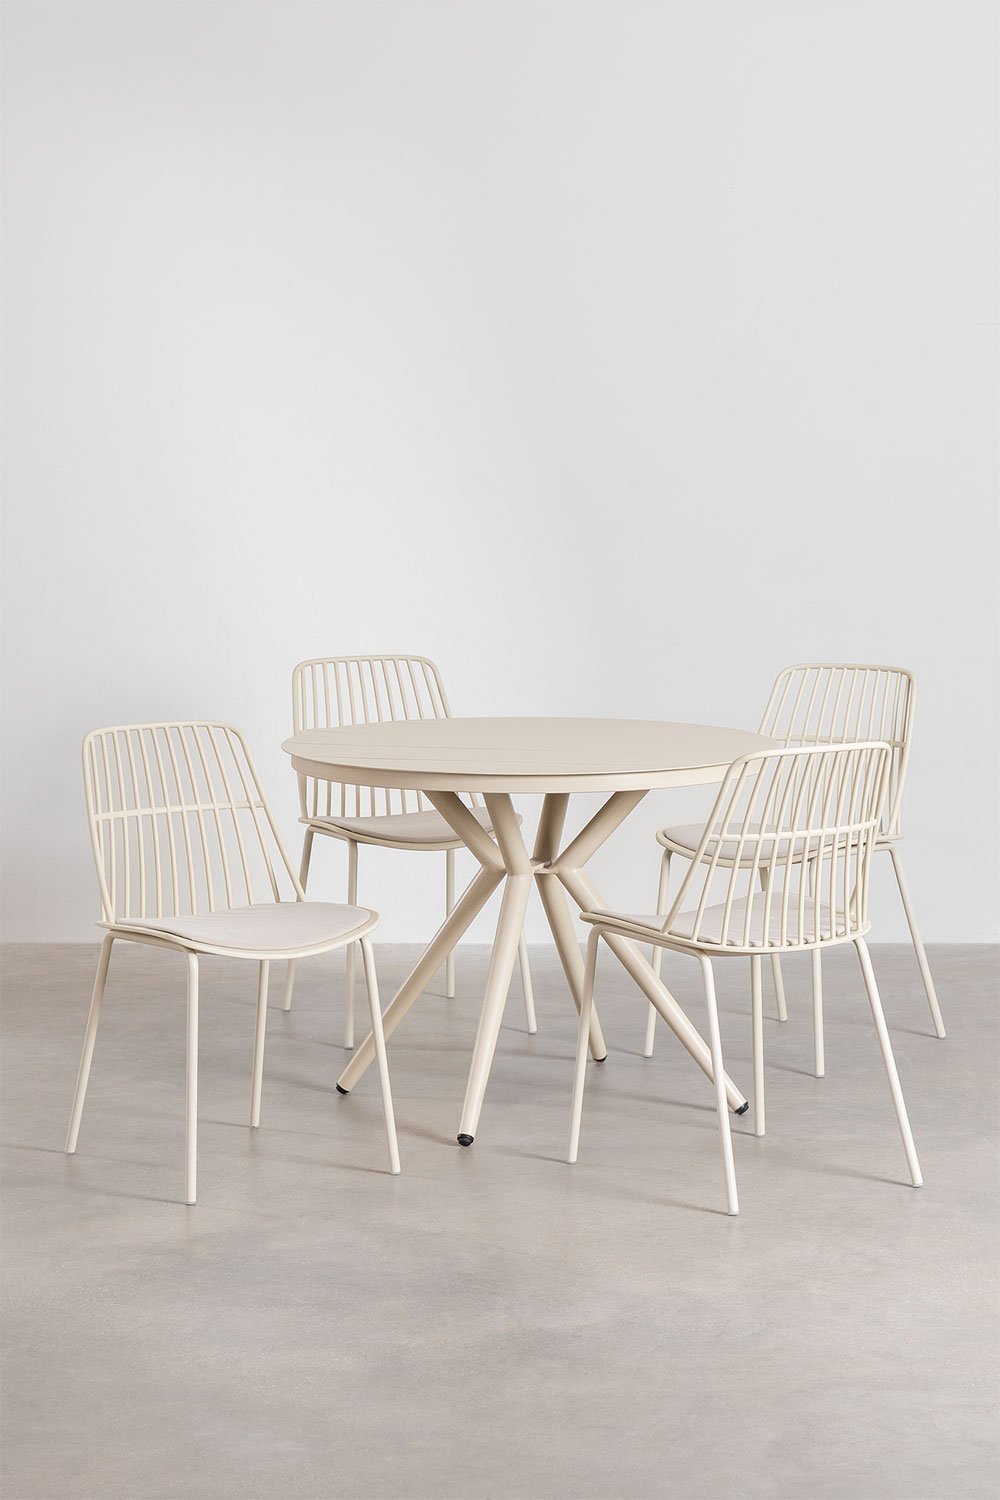 Set of Round Aluminum Table (Ø100 cm) Valerie and 4 Maeba Garden Chairs, gallery image 1